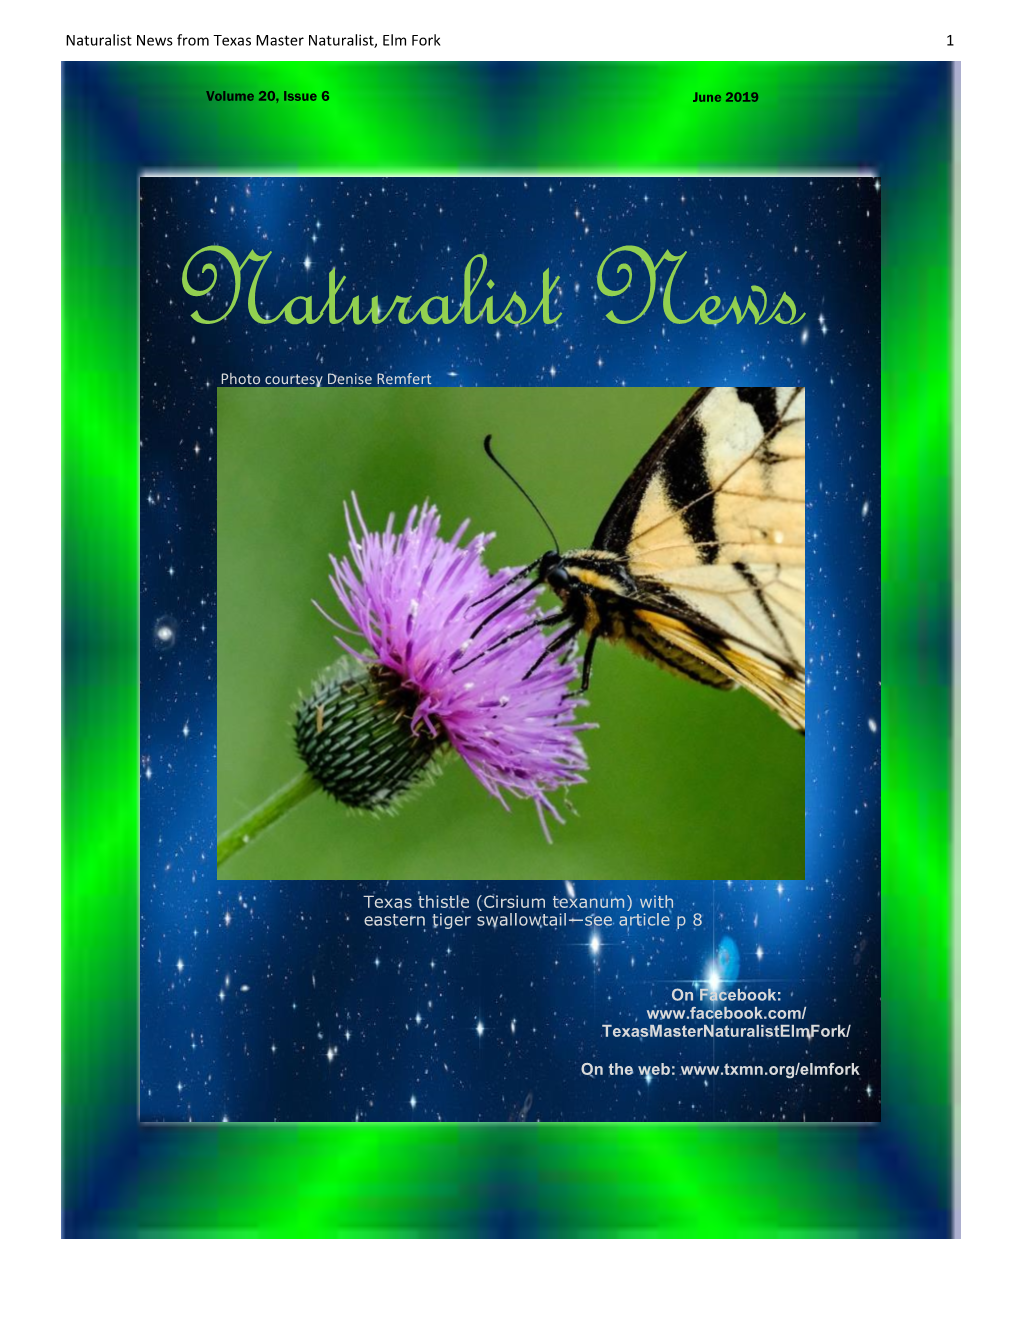 Cirsium Texanum) with Eastern Tiger Swallowtail—See Article P 8